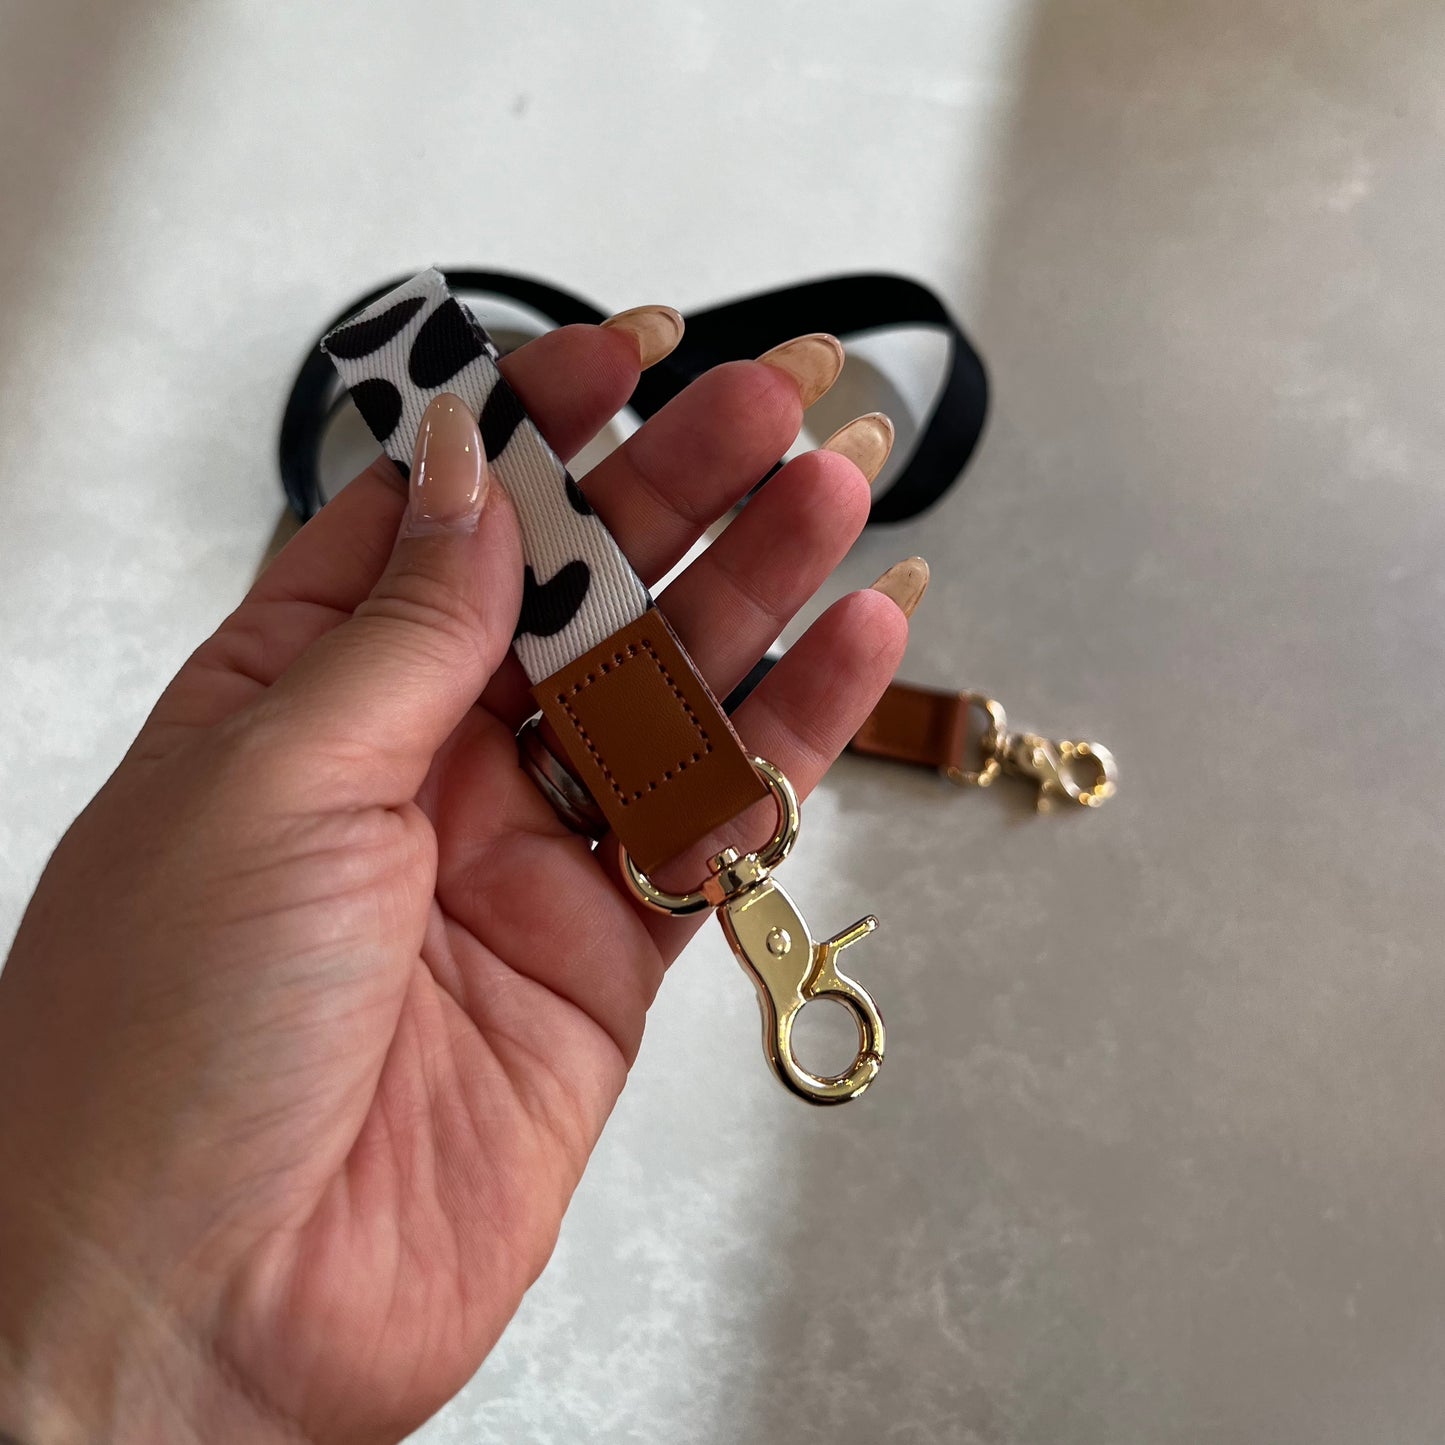 The Hands Free Key Tag